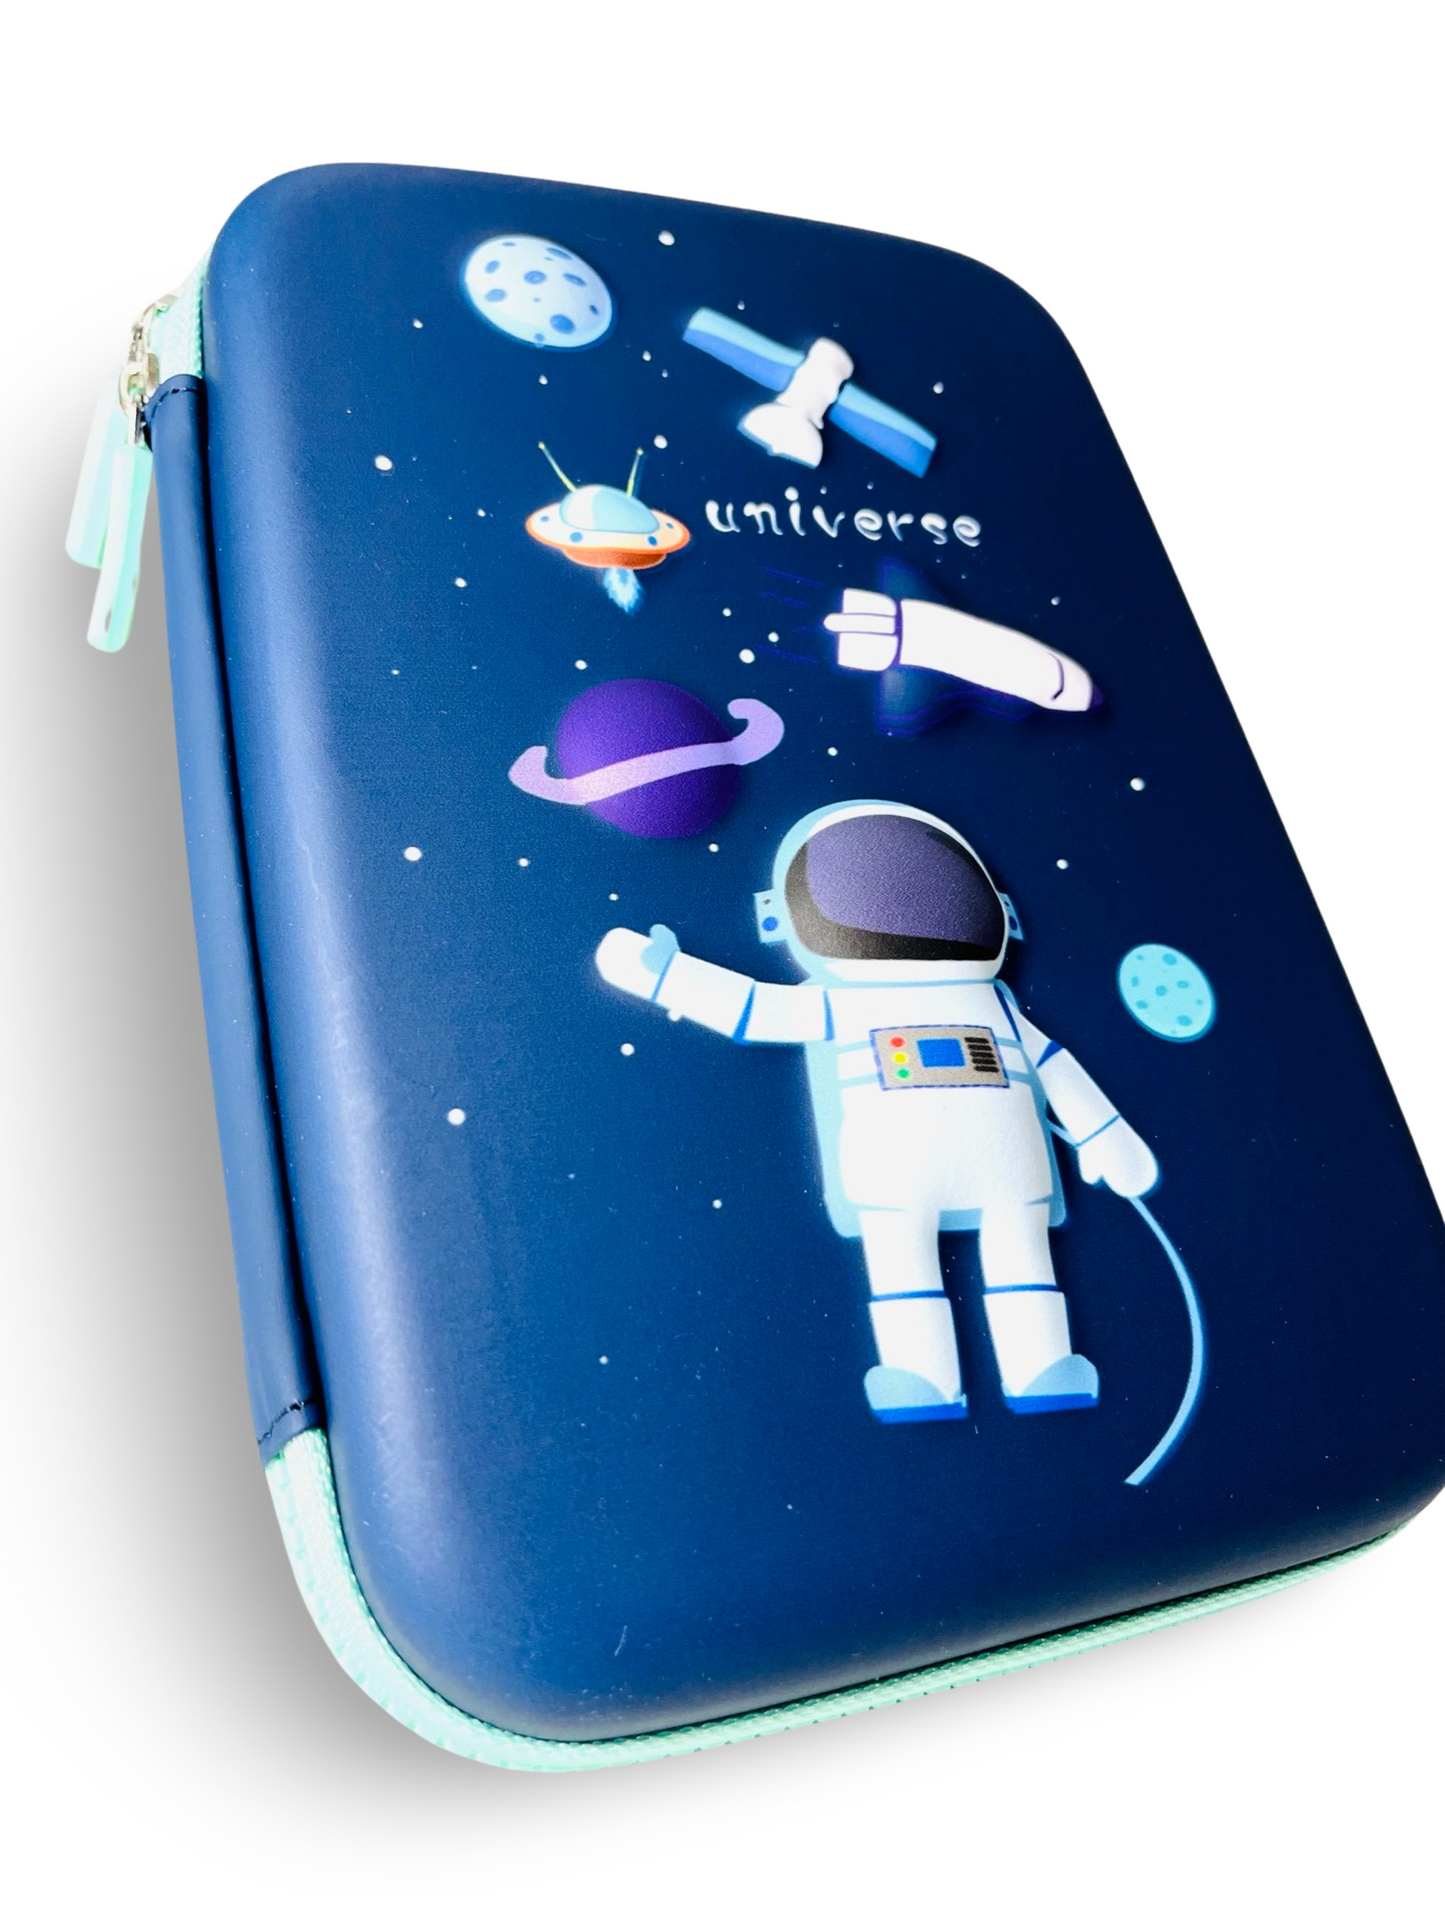 3D Cartoon Hard case Pencil Pouch for Kids ( Large stationary organiser with compartments )